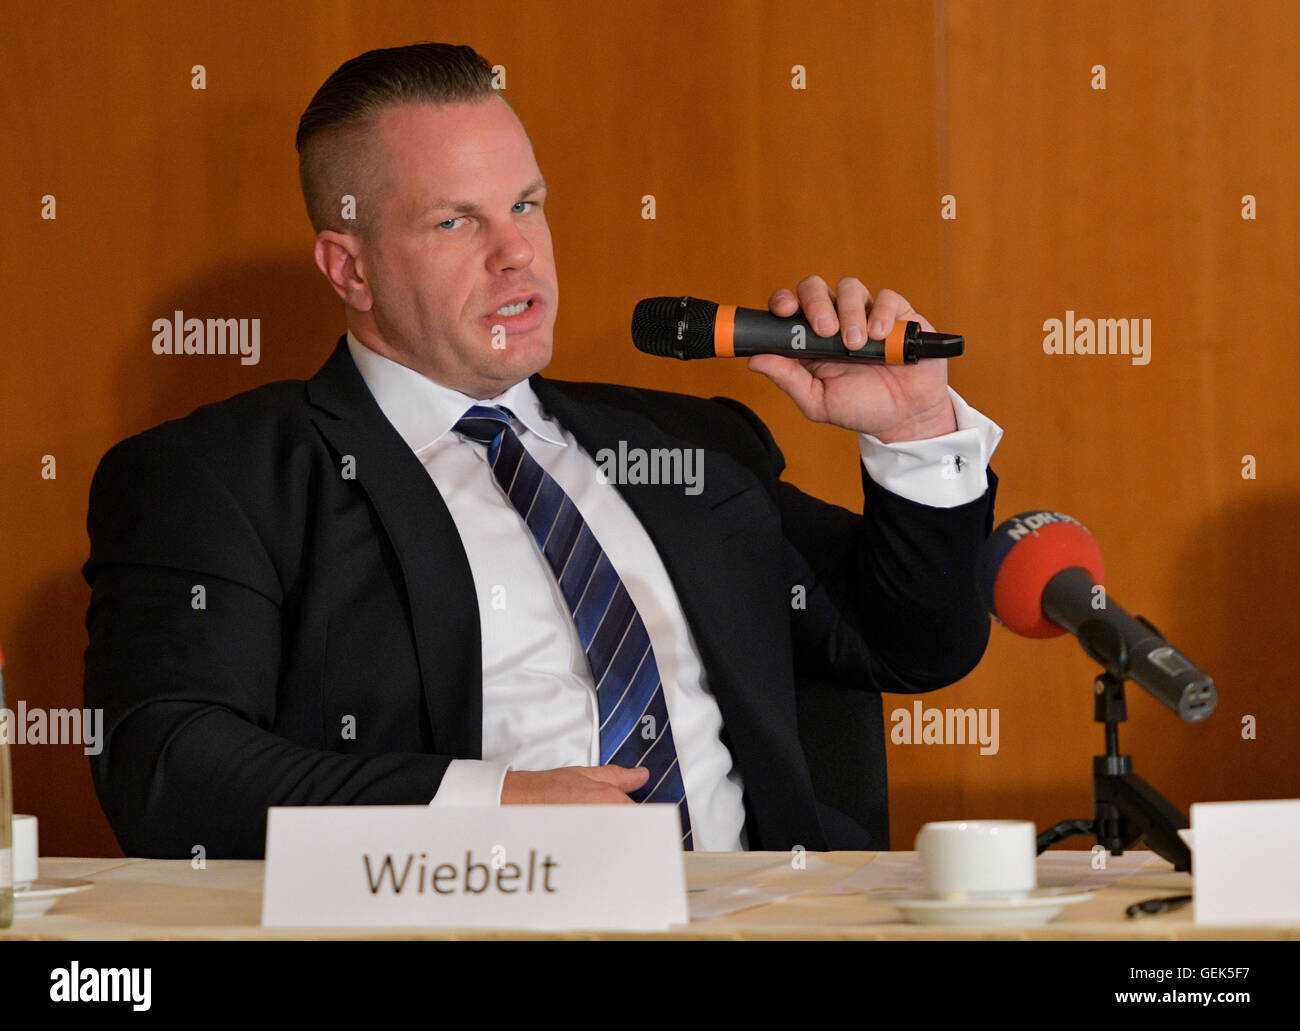 Hamburg, Germany. 14th July, 2016. Marco Wiebelt, sales manager of the Care-Energy Holding, photographed during a press conference of the Care Energy Group in Hamburg, Germany, 14 July 2016. PHOTO: AXEL HEIMKEN/dpa/Alamy Live News Stock Photo